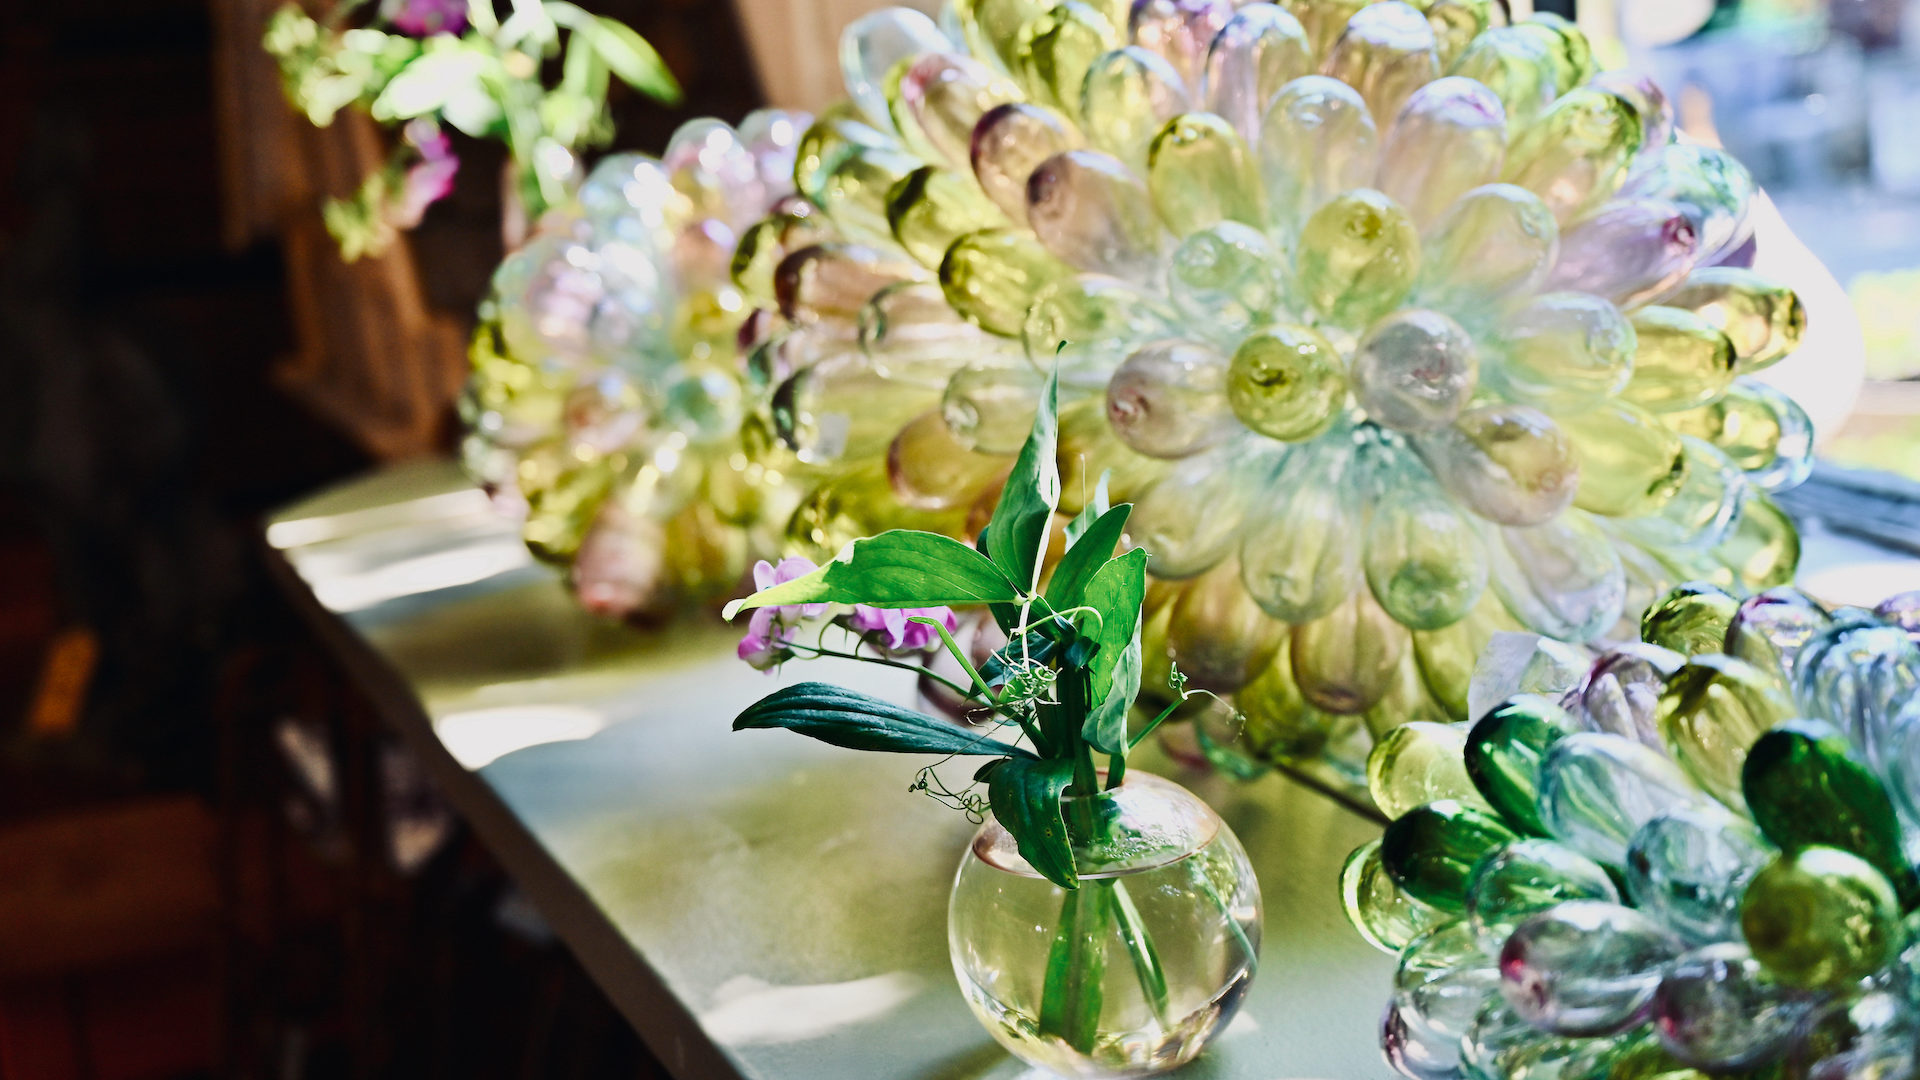 Shop: Handmade Glass Grape Cluster Sculptures Are Mixing Well with Sweet Peas | Detroit Garden Works